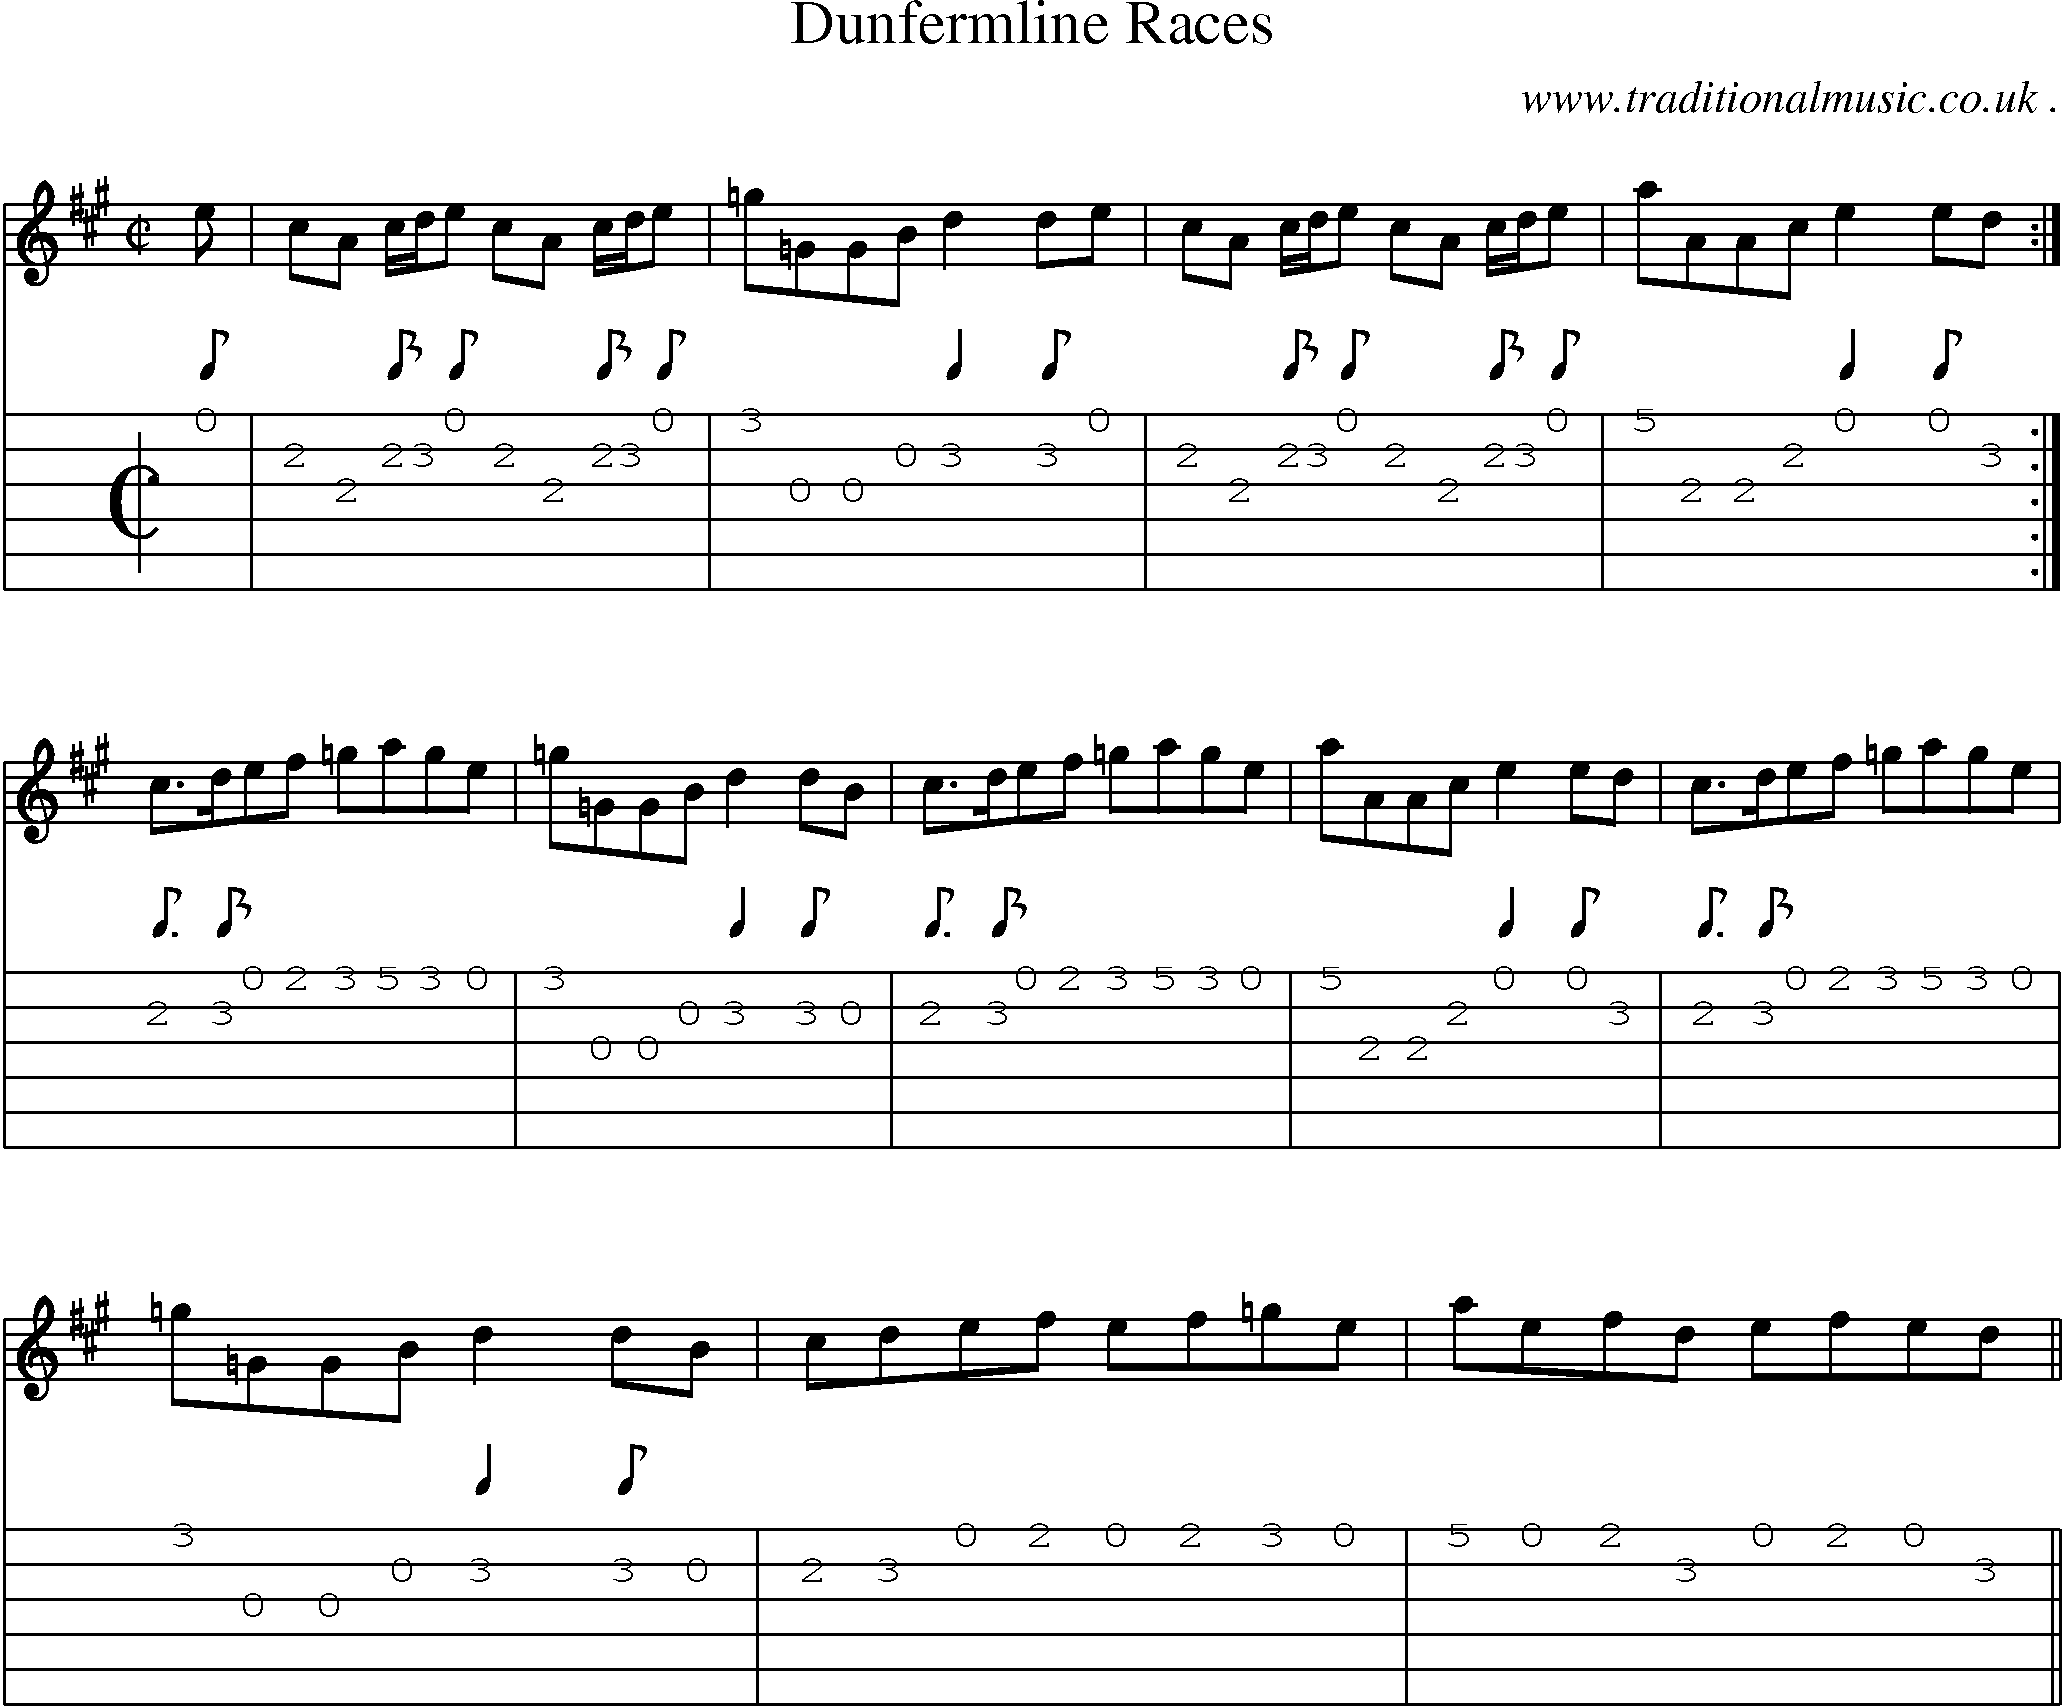 Sheet-music  score, Chords and Guitar Tabs for Dunfermline Races